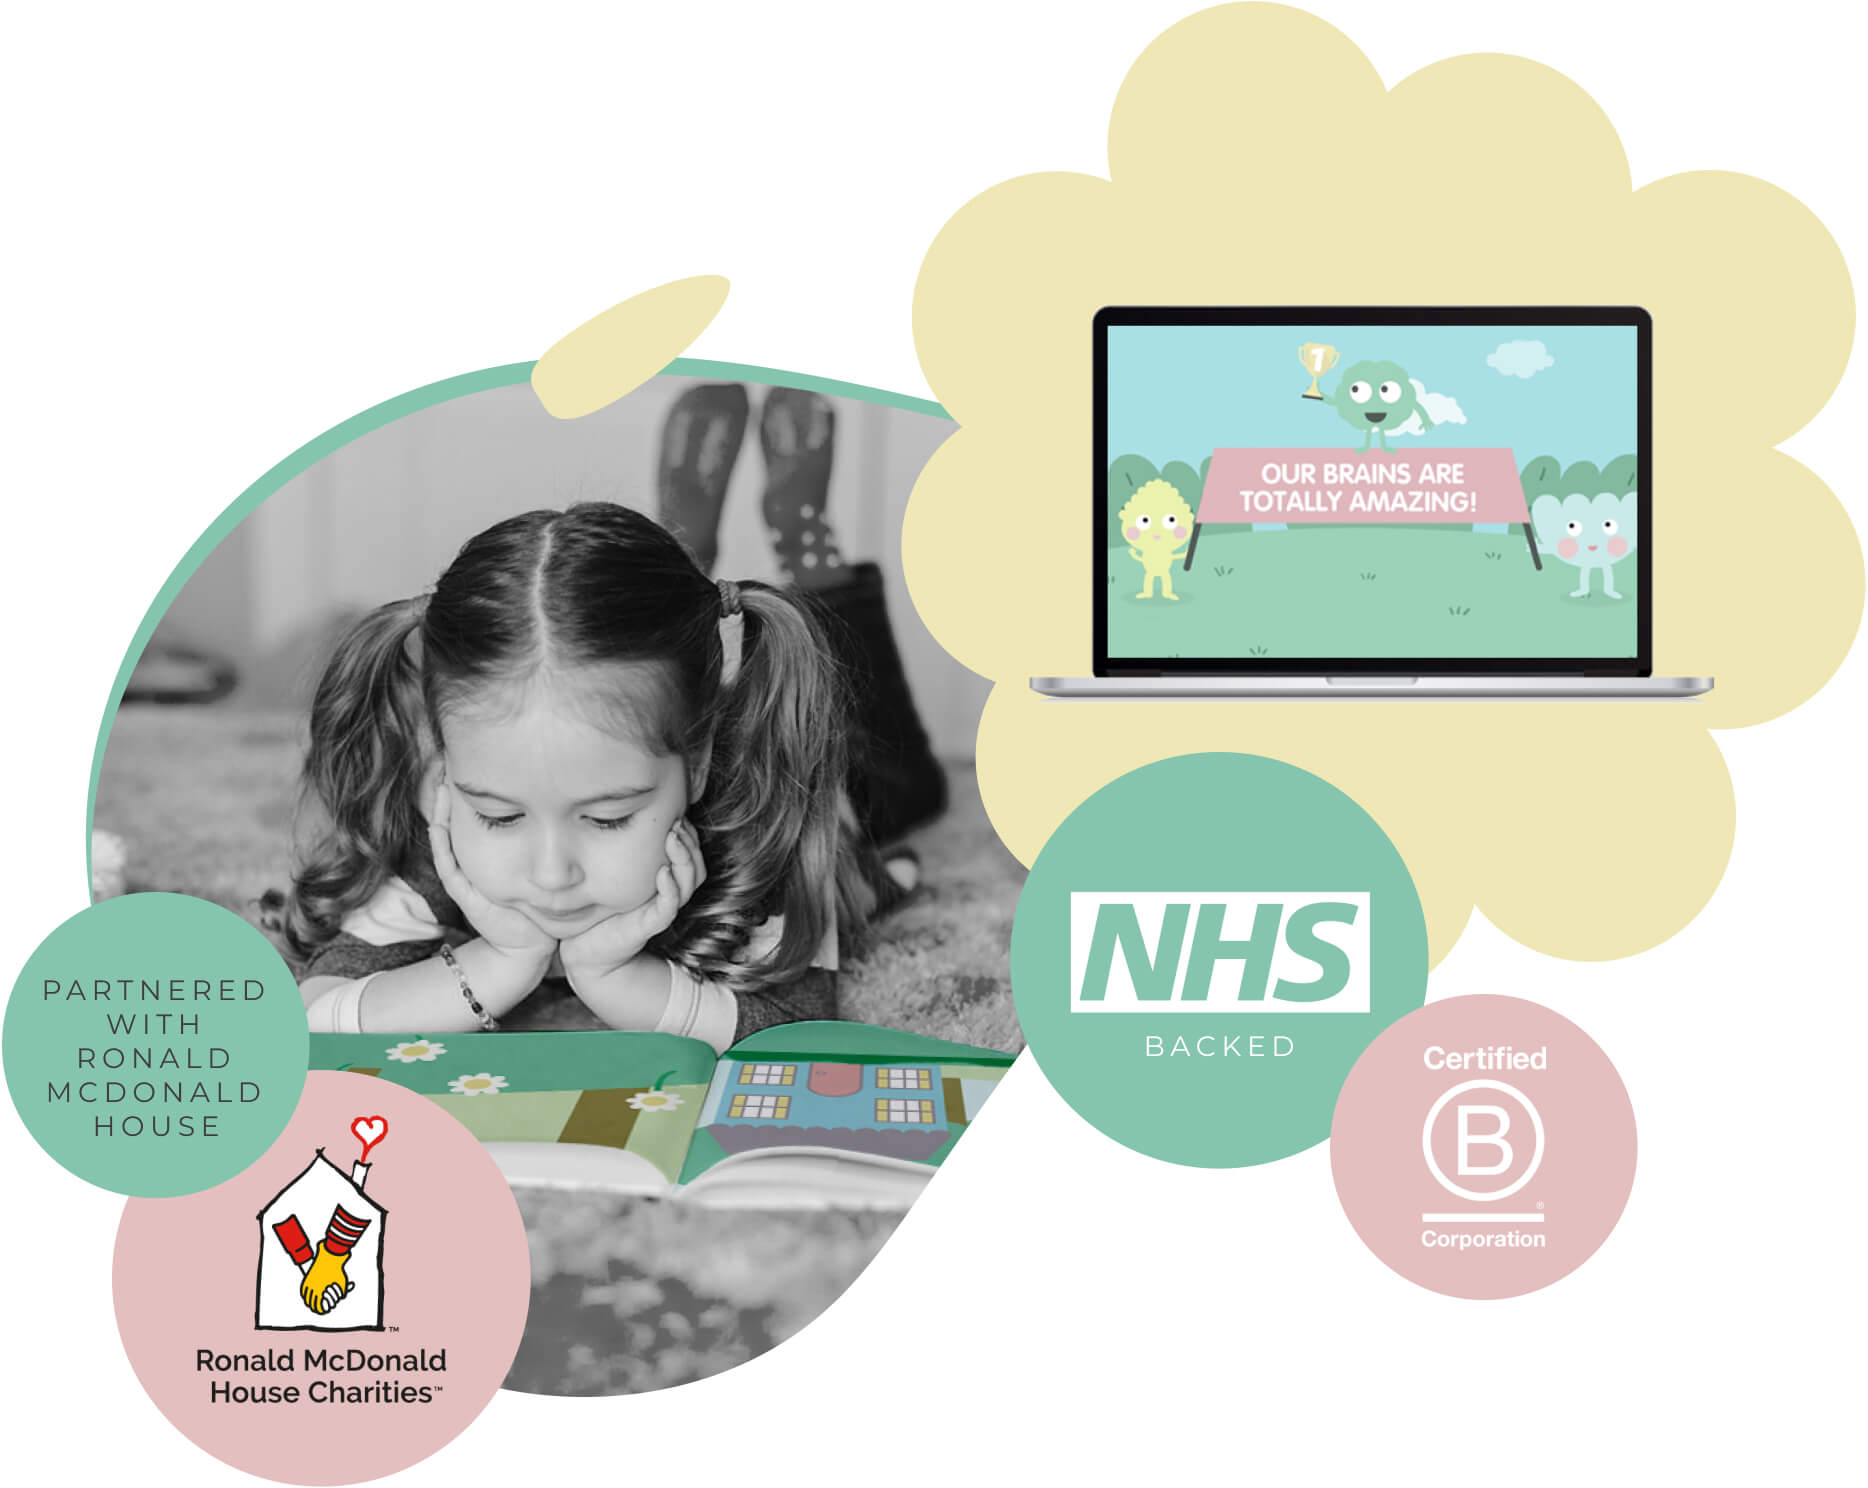 myHappymind mental health and wellbeing website header image featuring and image of course content, the NHS Backed and B Corporation logos. As well as the Ronald McDonald House Charity logo.